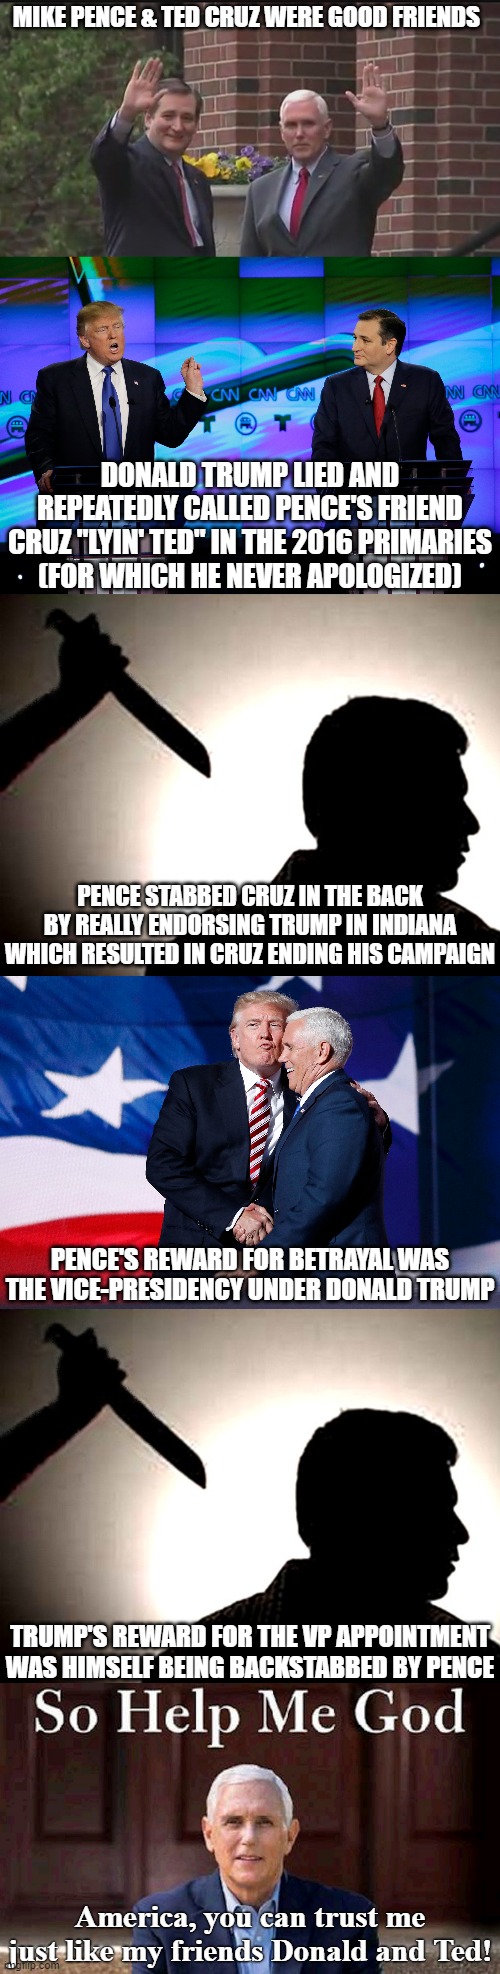 et tu Mike?  But by all means, let's consider him for president in 2024 (not) | MIKE PENCE & TED CRUZ WERE GOOD FRIENDS; DONALD TRUMP LIED AND REPEATEDLY CALLED PENCE'S FRIEND CRUZ "LYIN' TED" IN THE 2016 PRIMARIES
(FOR WHICH HE NEVER APOLOGIZED); PENCE STABBED CRUZ IN THE BACK BY REALLY ENDORSING TRUMP IN INDIANA WHICH RESULTED IN CRUZ ENDING HIS CAMPAIGN; PENCE'S REWARD FOR BETRAYAL WAS THE VICE-PRESIDENCY UNDER DONALD TRUMP; TRUMP'S REWARD FOR THE VP APPOINTMENT WAS HIMSELF BEING BACKSTABBED BY PENCE; America, you can trust me just like my friends Donald and Ted! | image tagged in mike pence,gop hypocrite,backstabber | made w/ Imgflip meme maker